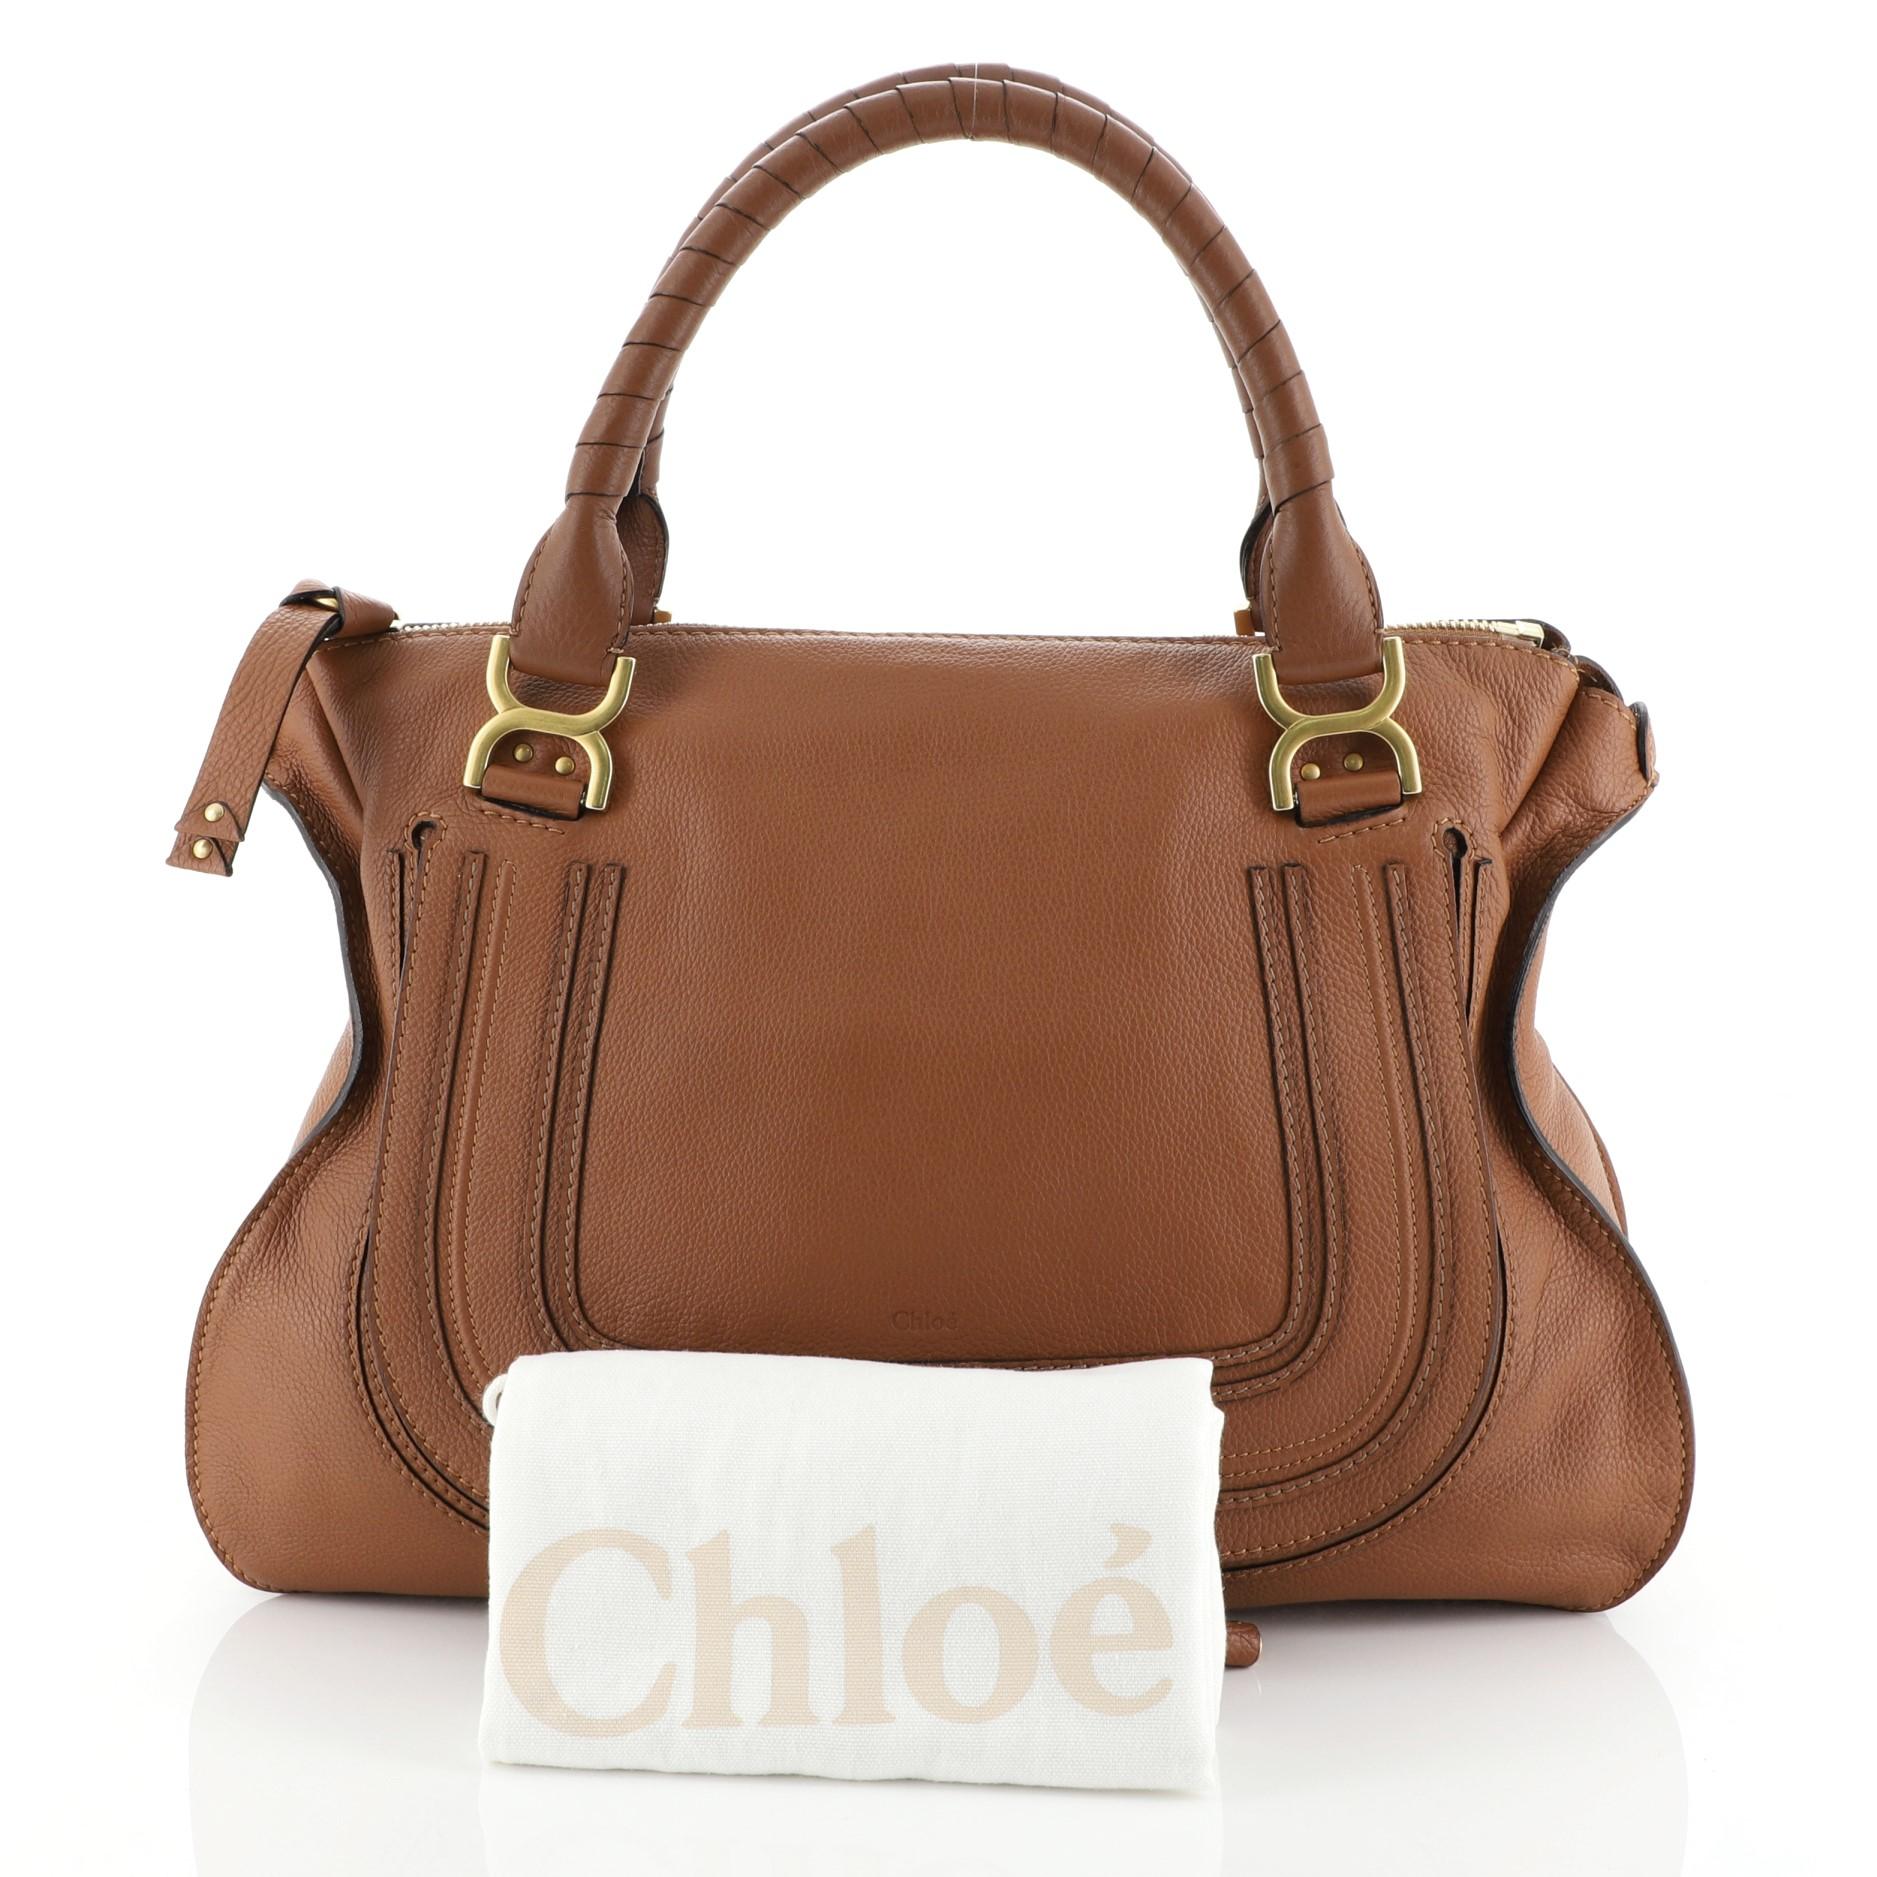 This Chloe Marcie Shoulder Bag Leather Large, crafted from brown leather, features wrapped leather handles, horseshoe stitched front flap, and gold-tone hardware. Its zip closure opens to a green fabric interior with zip and slip pockets.